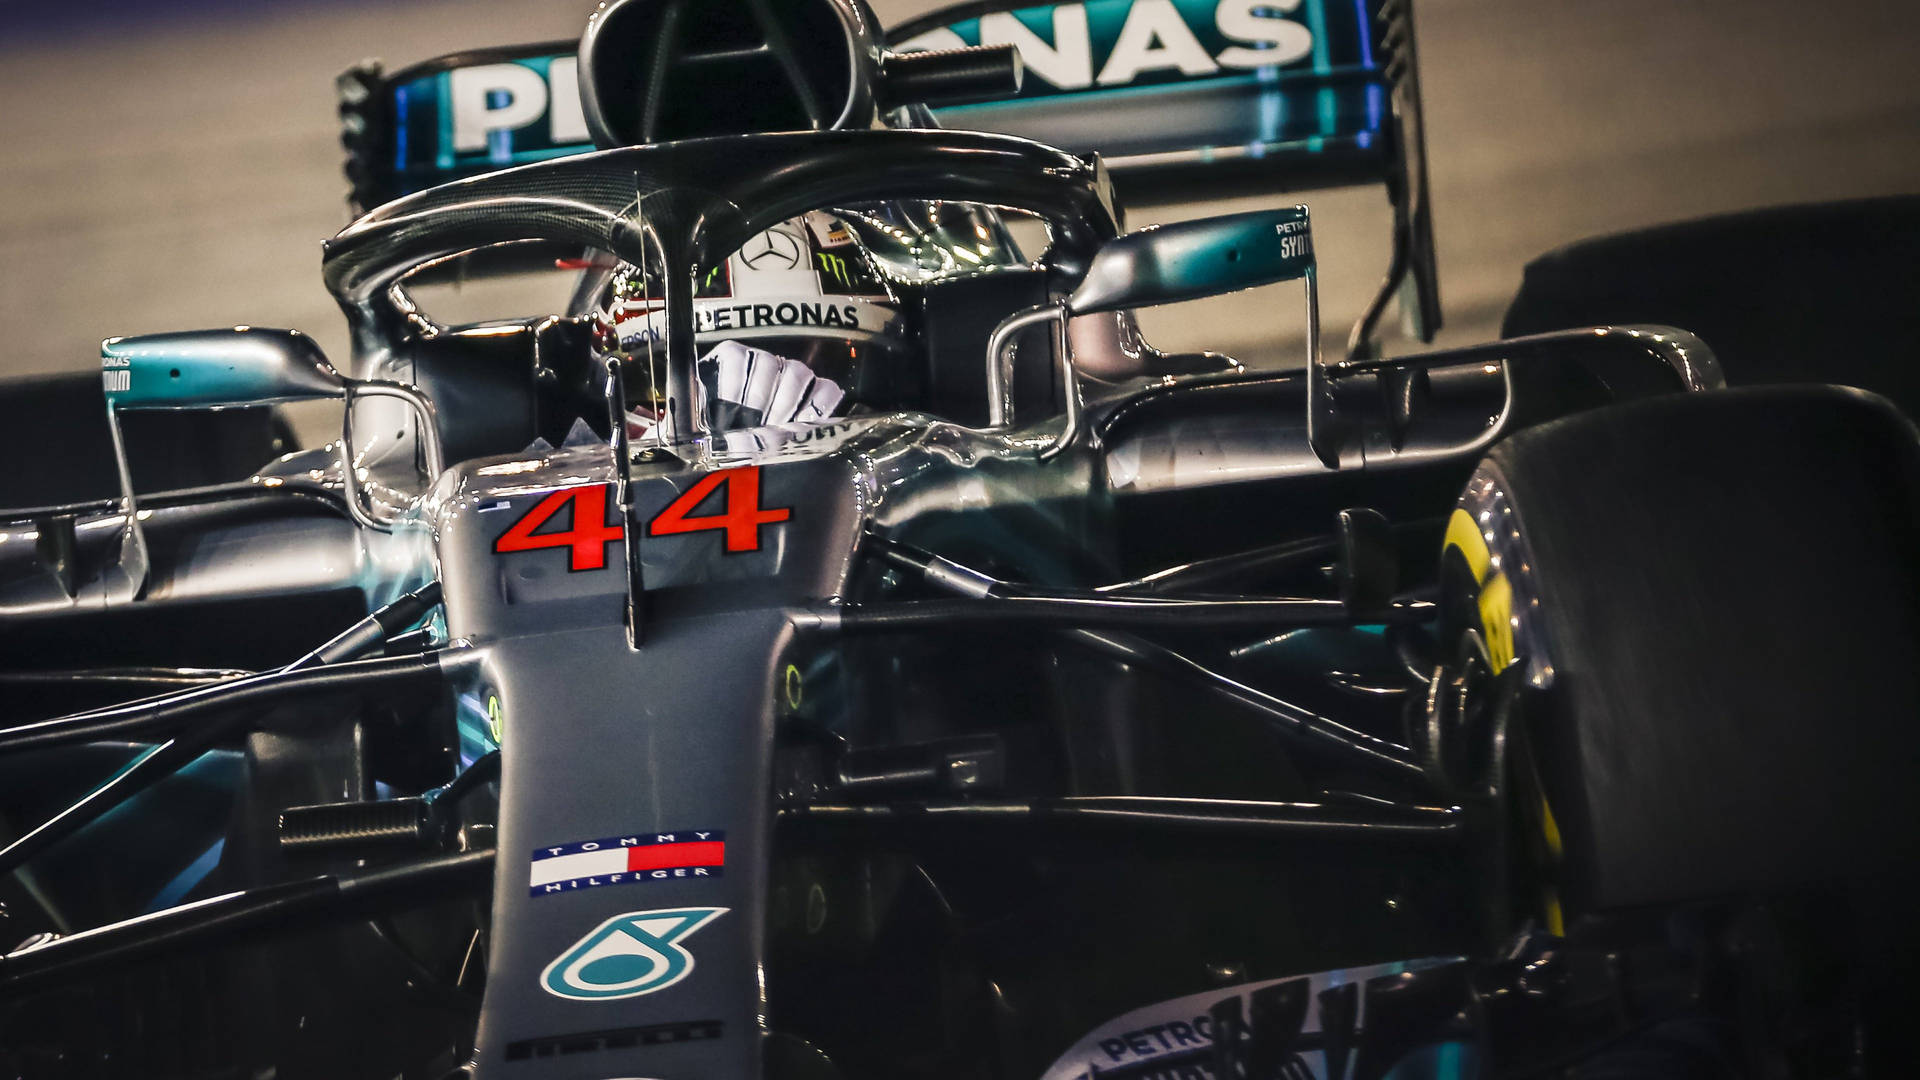 A Mercedes F1 Car With Number 44 On It Wallpaper